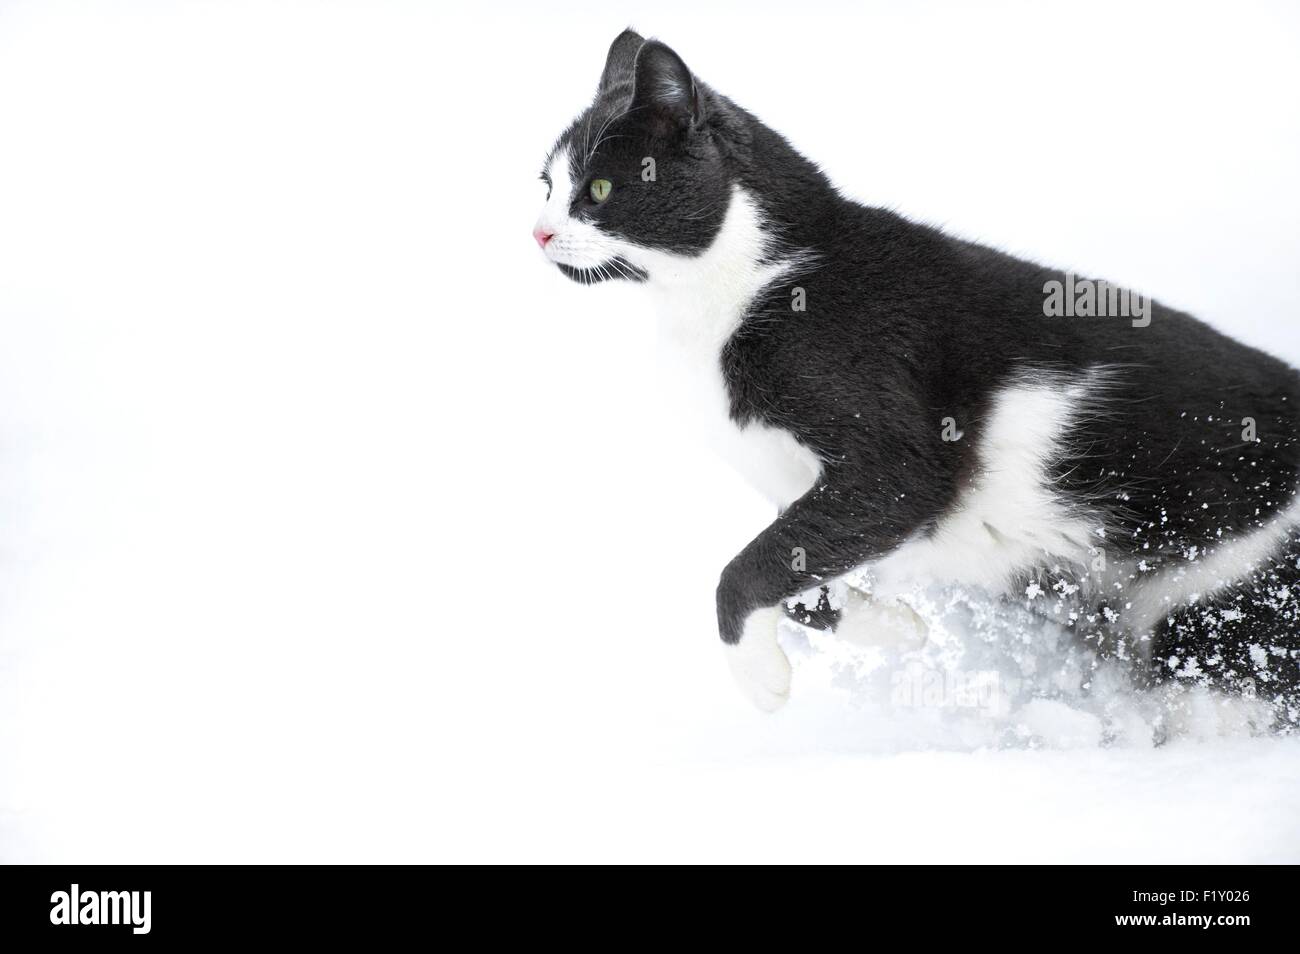 France, Isere, domestic cat (Felis silvestris catus), grey and white, female, adult, in snow Stock Photo